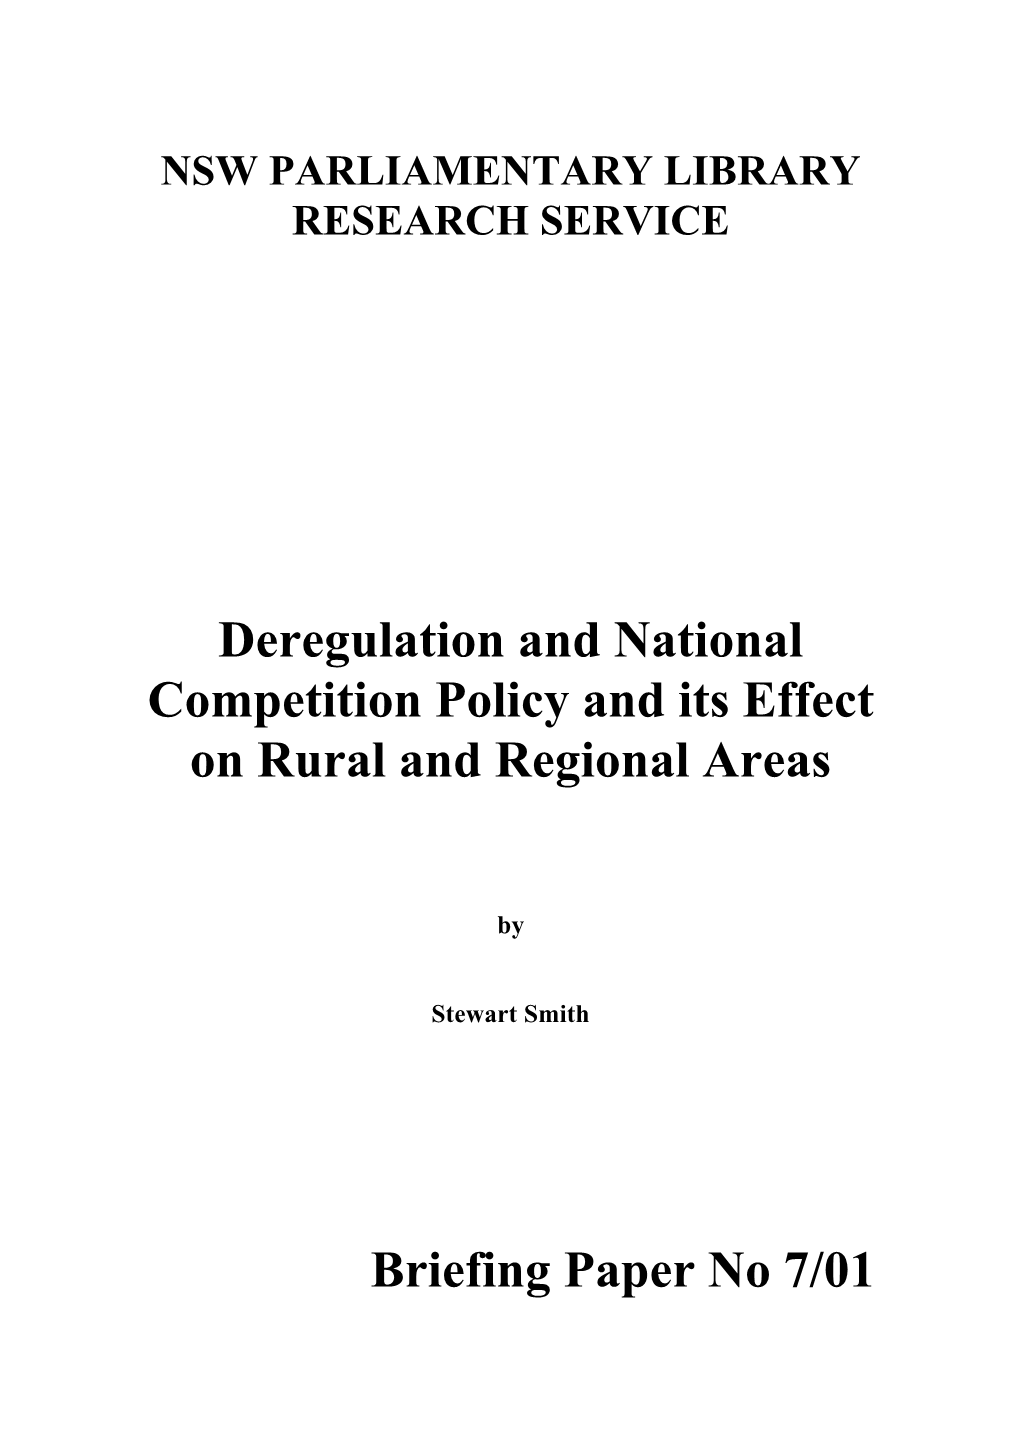 Deregulation and National Competition Policy and Its Effect on Rural and Regional Areas